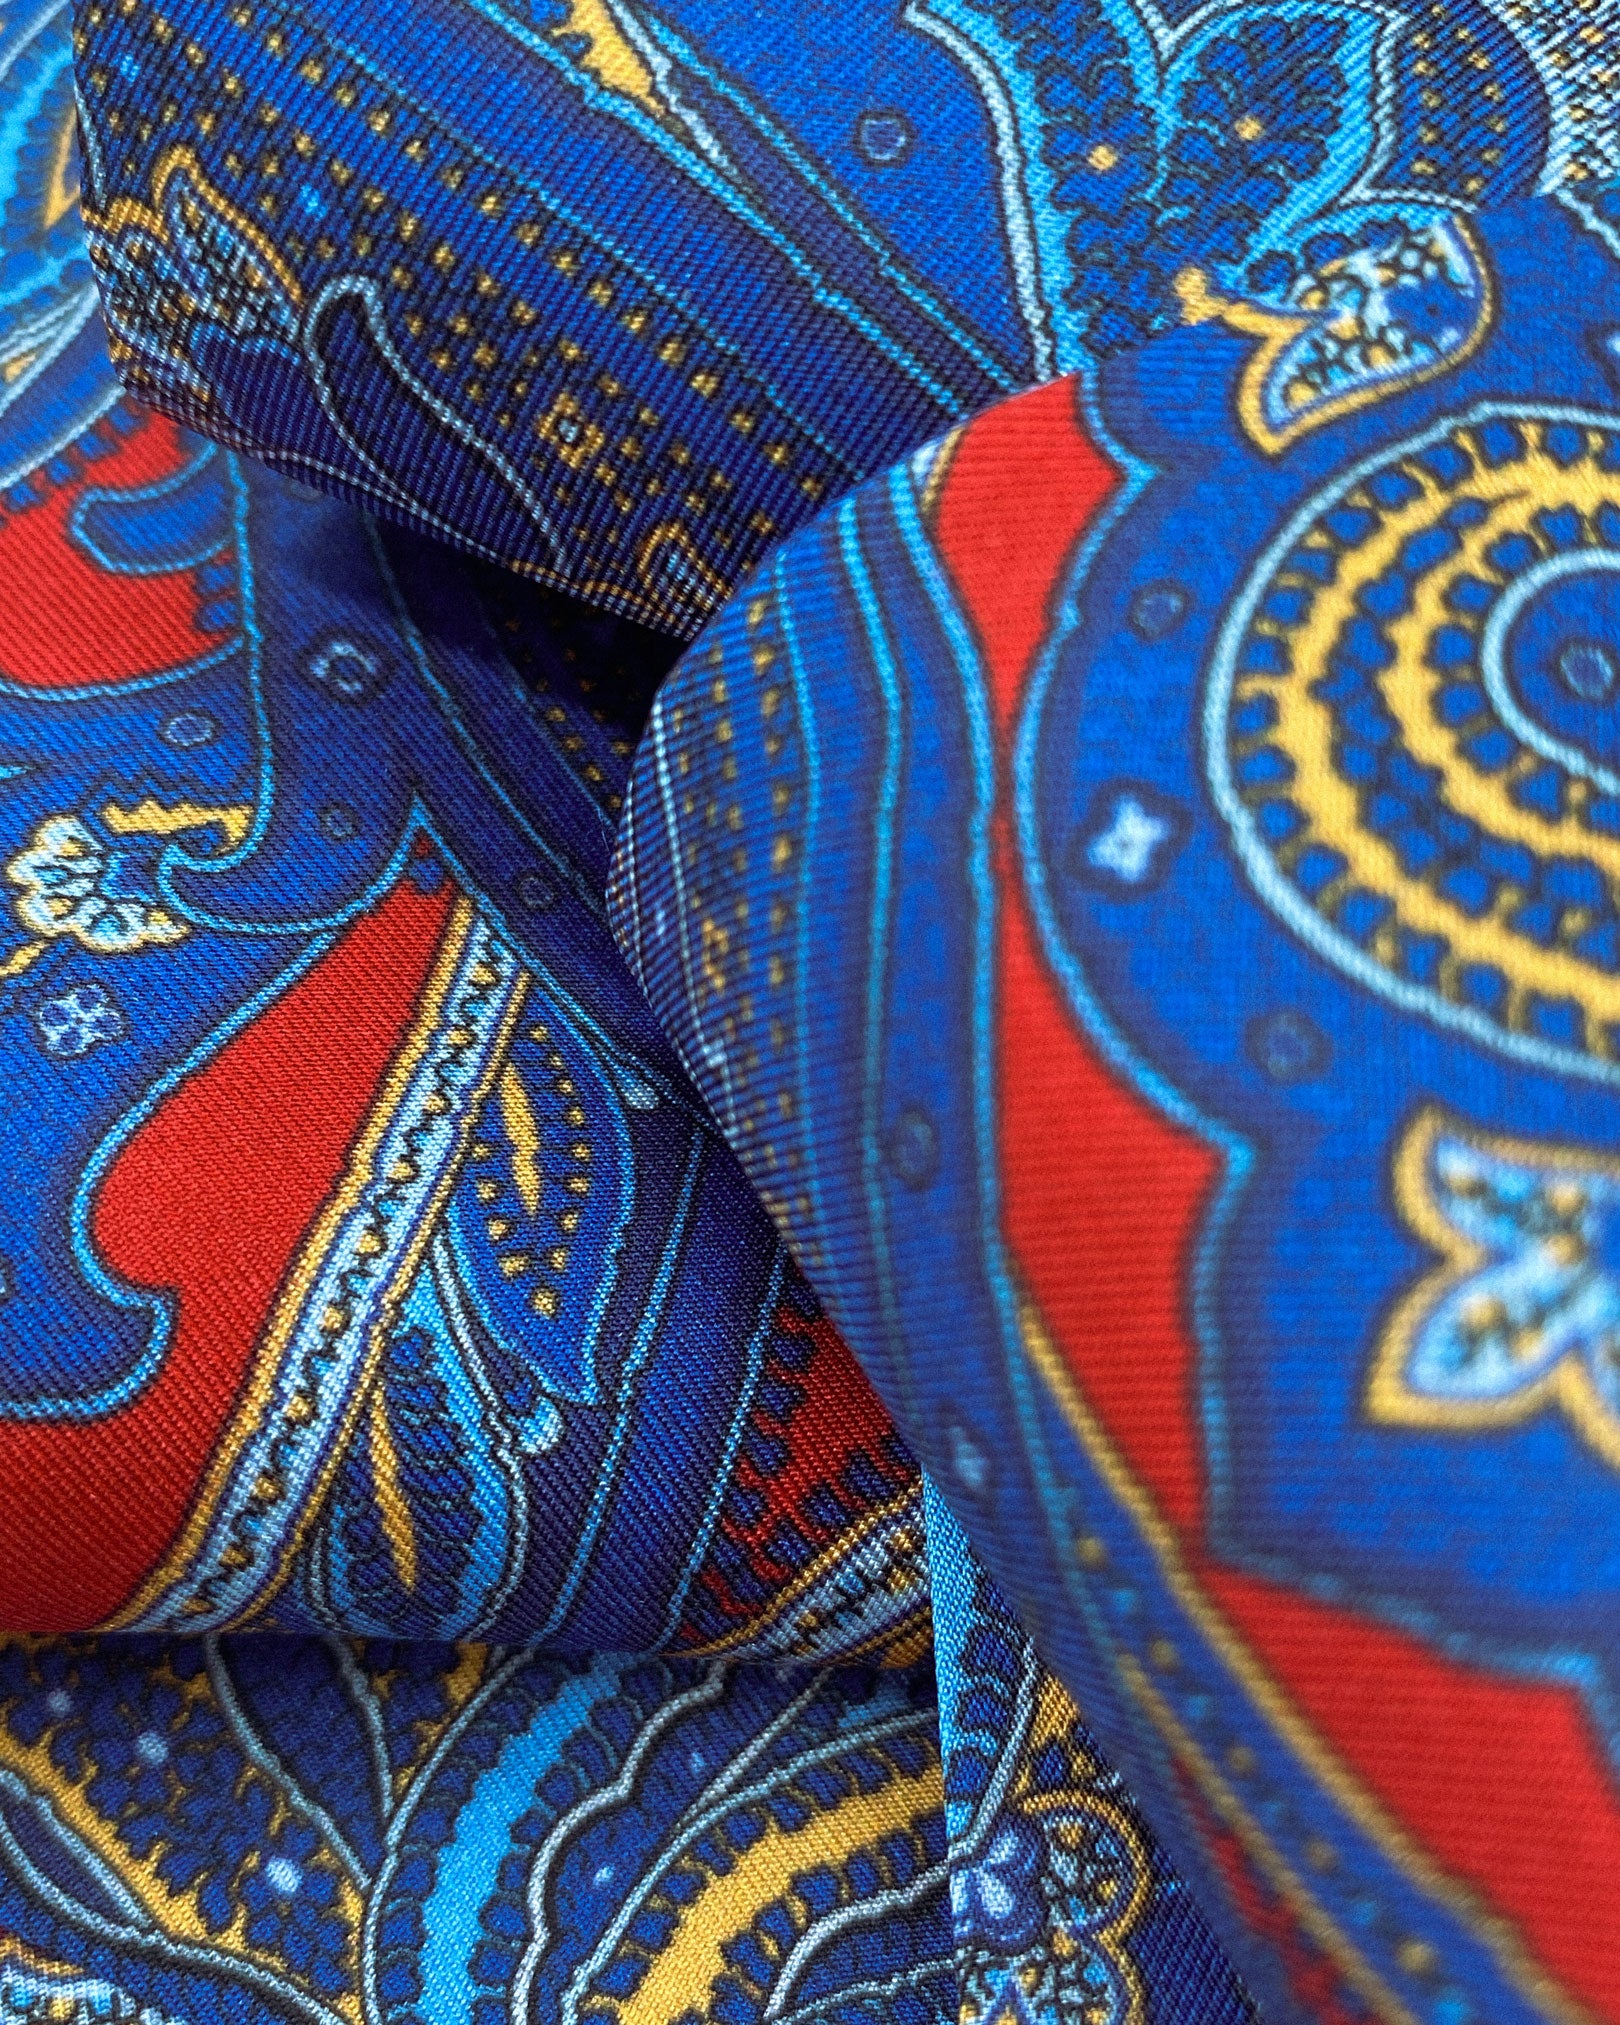 Ruffled close-up view of the Oxford silk neckerchief, presenting a closer view of the intricate swirls of blue and red paisley and appealing lustre of the material.